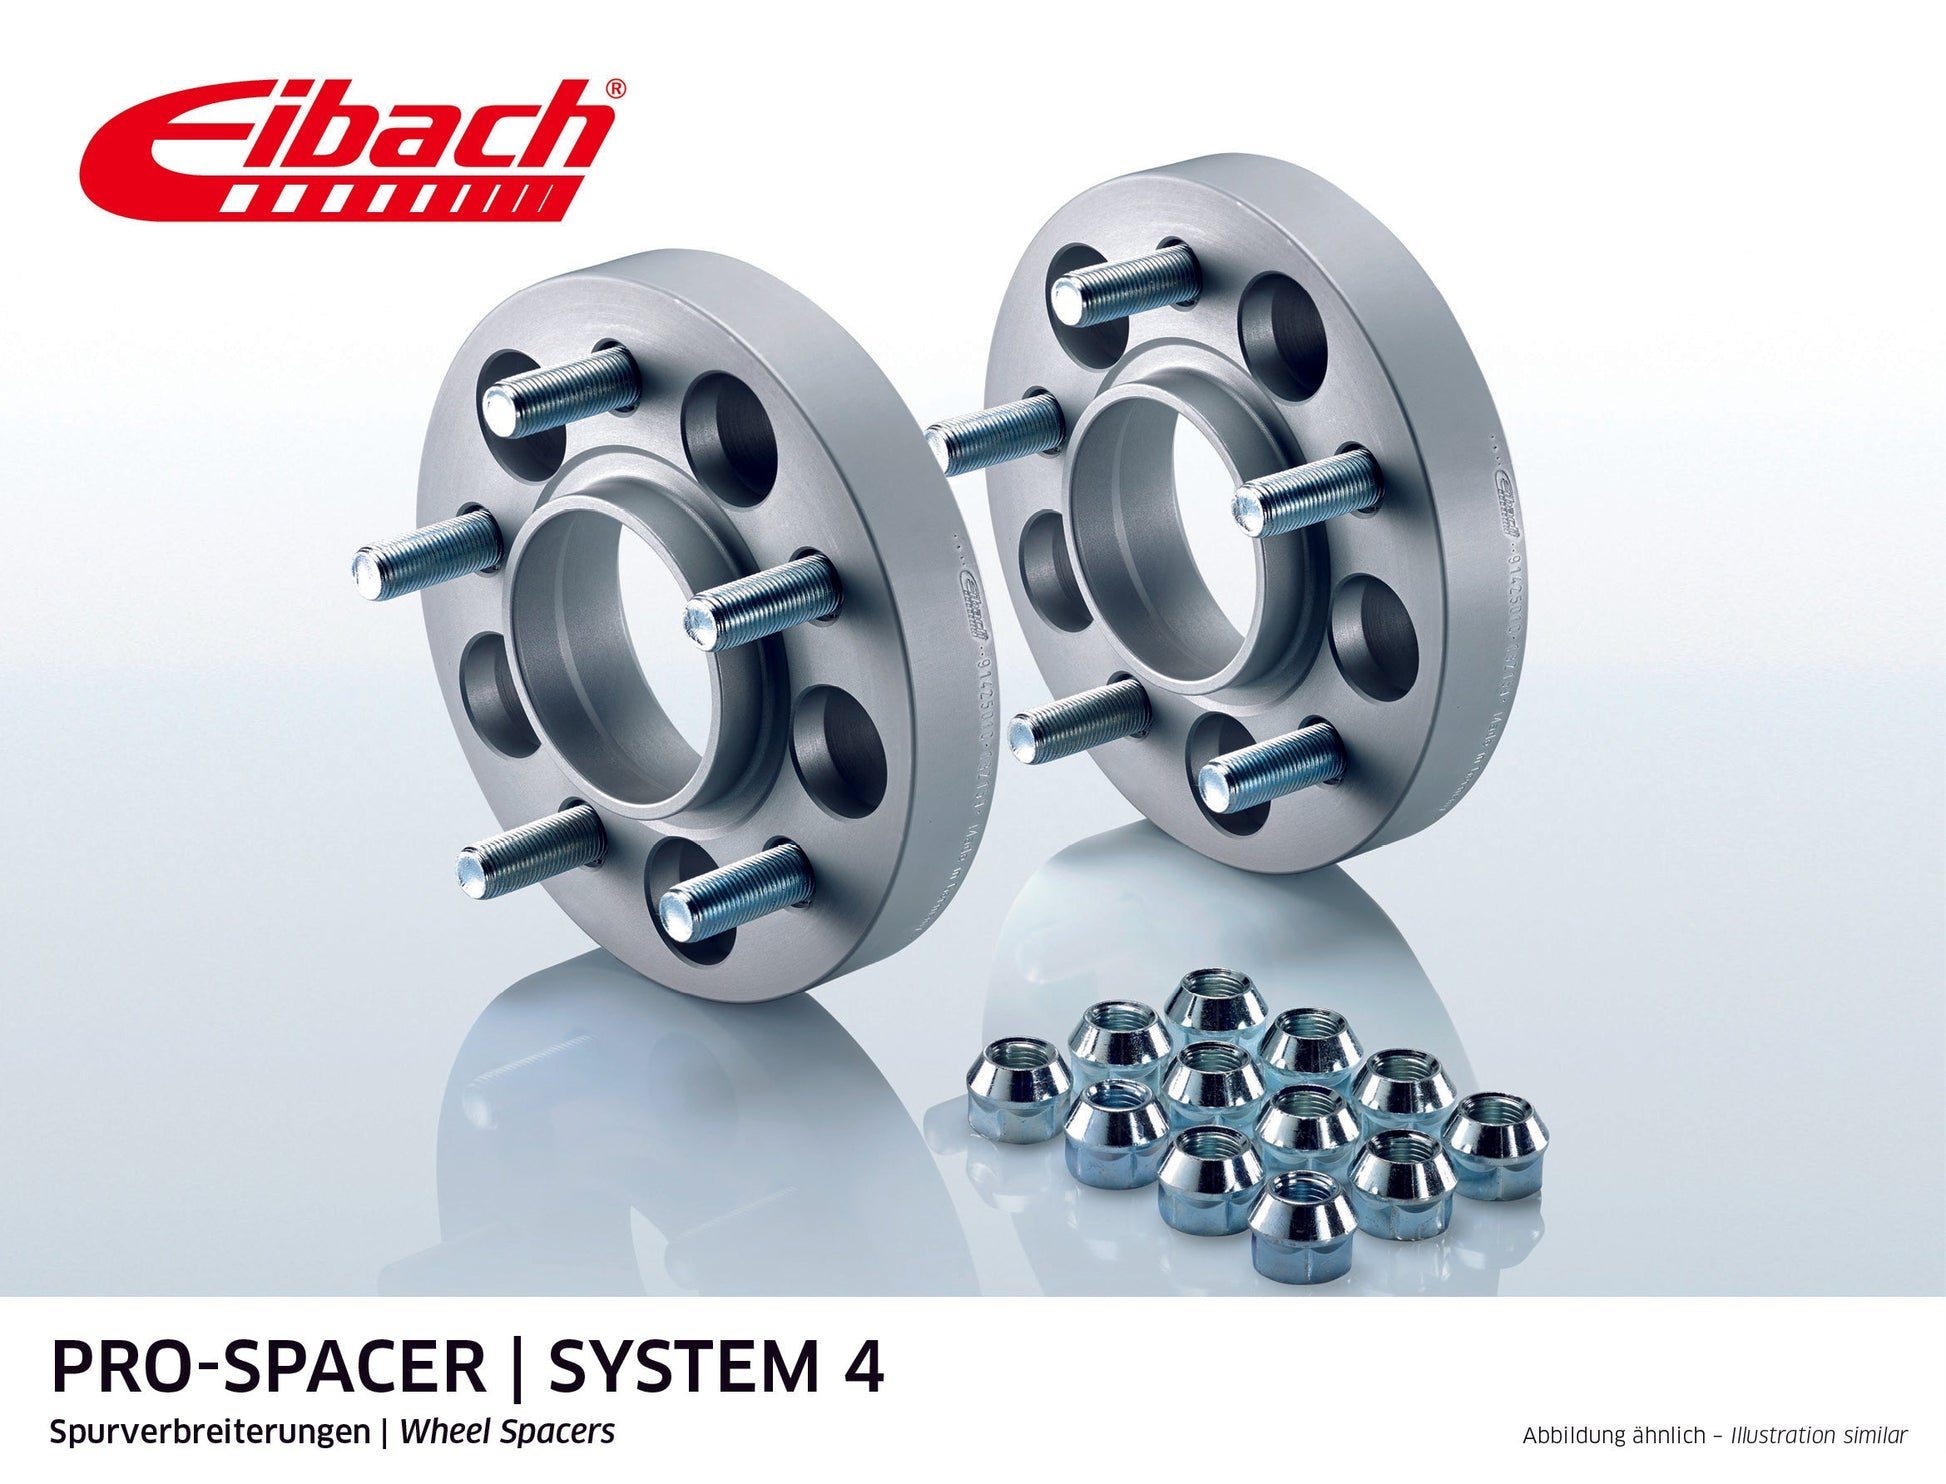 Eibach Pro-Spacer Kit (Pair Of Spacers) 25mm Per Spacer (System 4) S90-4-25-043 (Silver) at £175.85